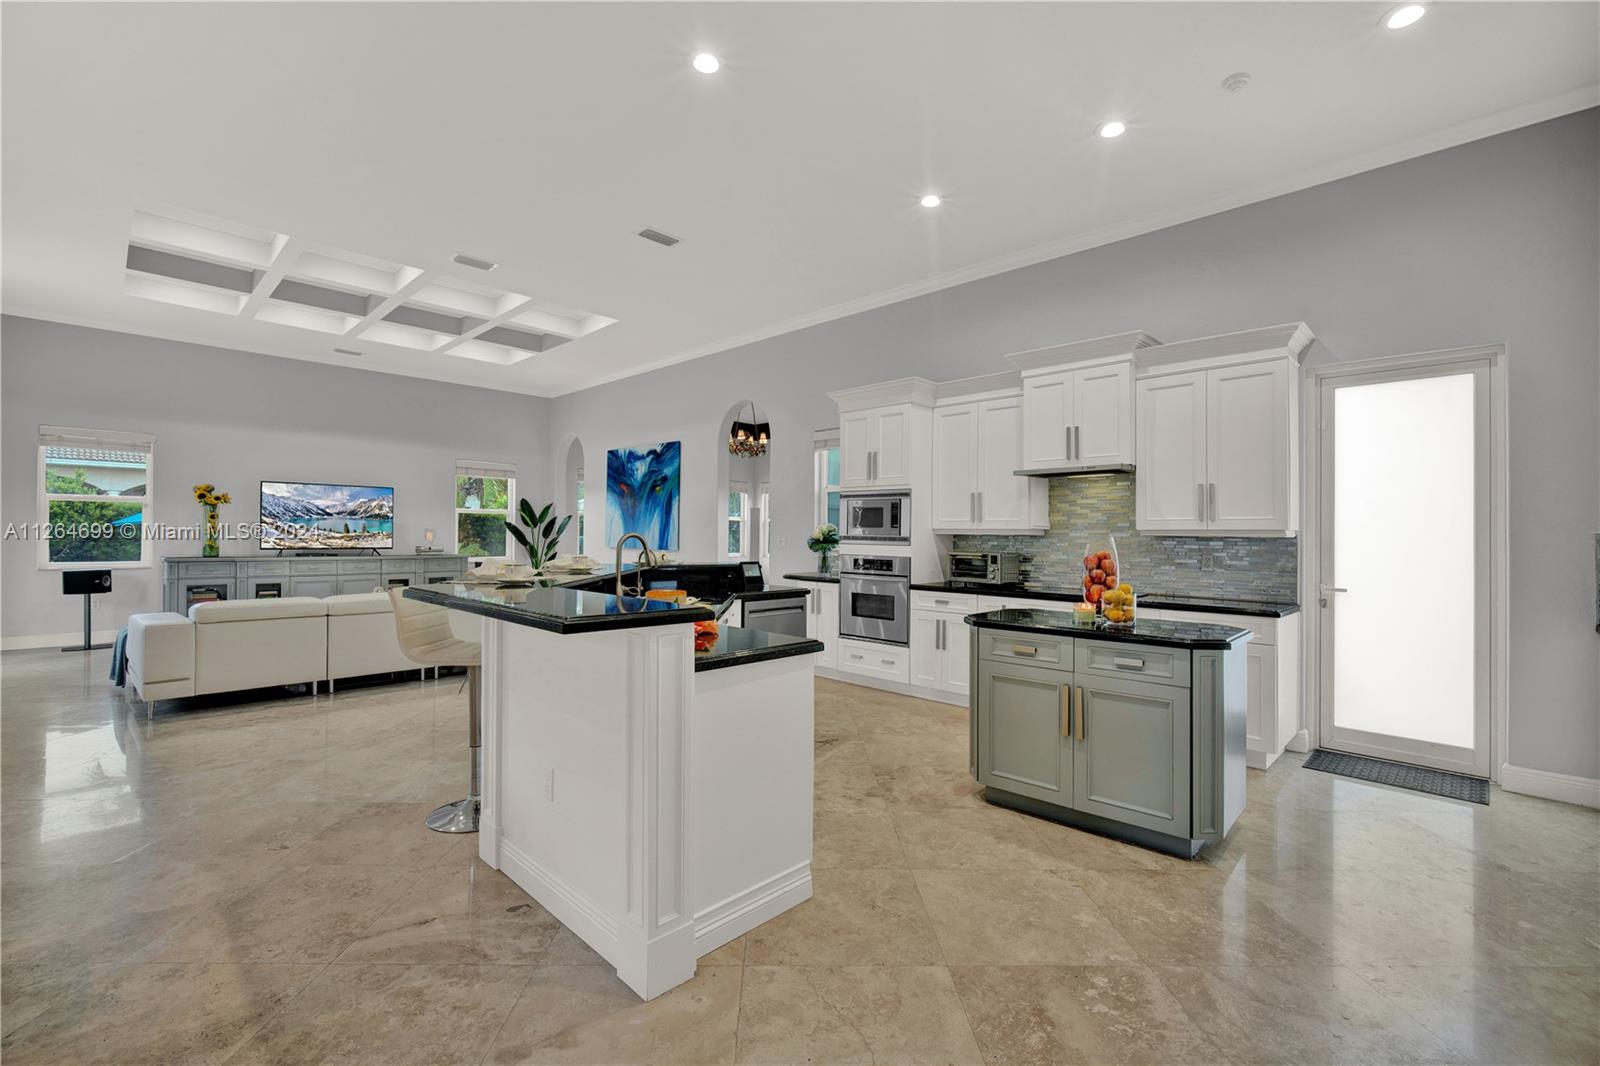 Expansive Kitchen & Family Room - Marble Flooring